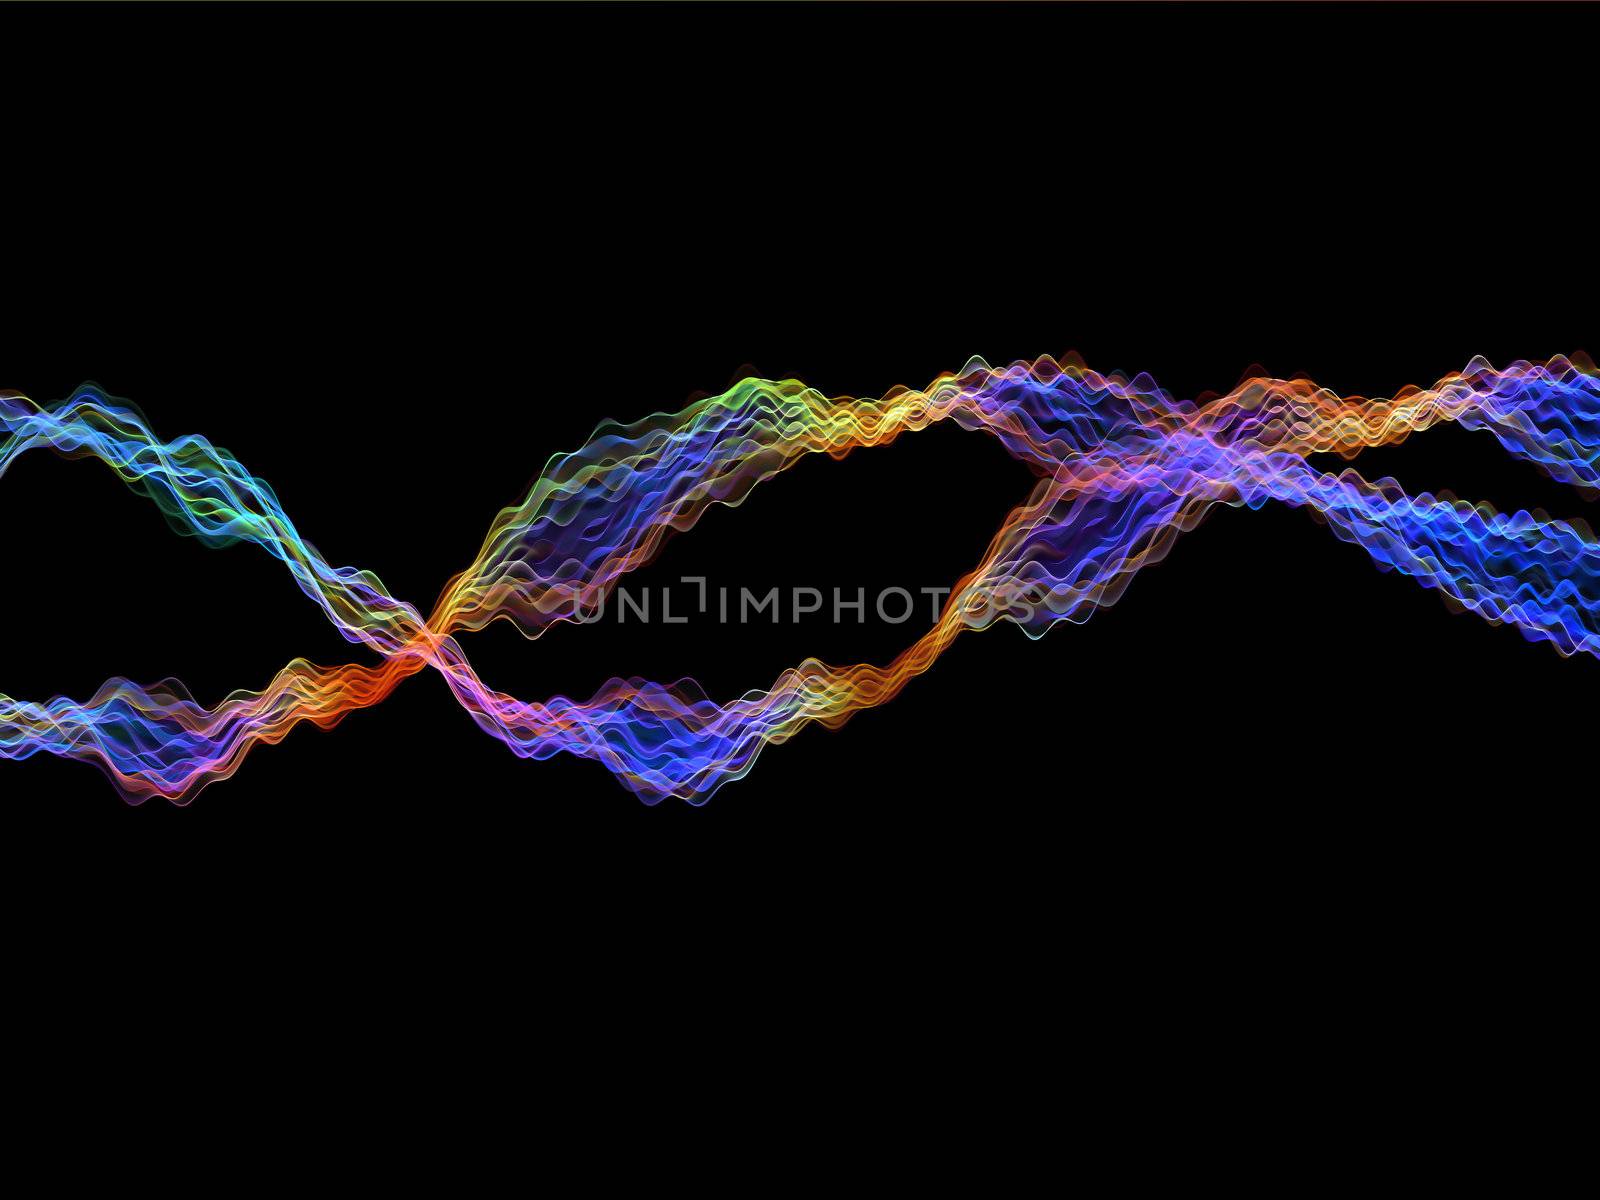 Rendering of colorful oscillating fractal elements against plain background suitable as backdrop for art, music or entertainment projects